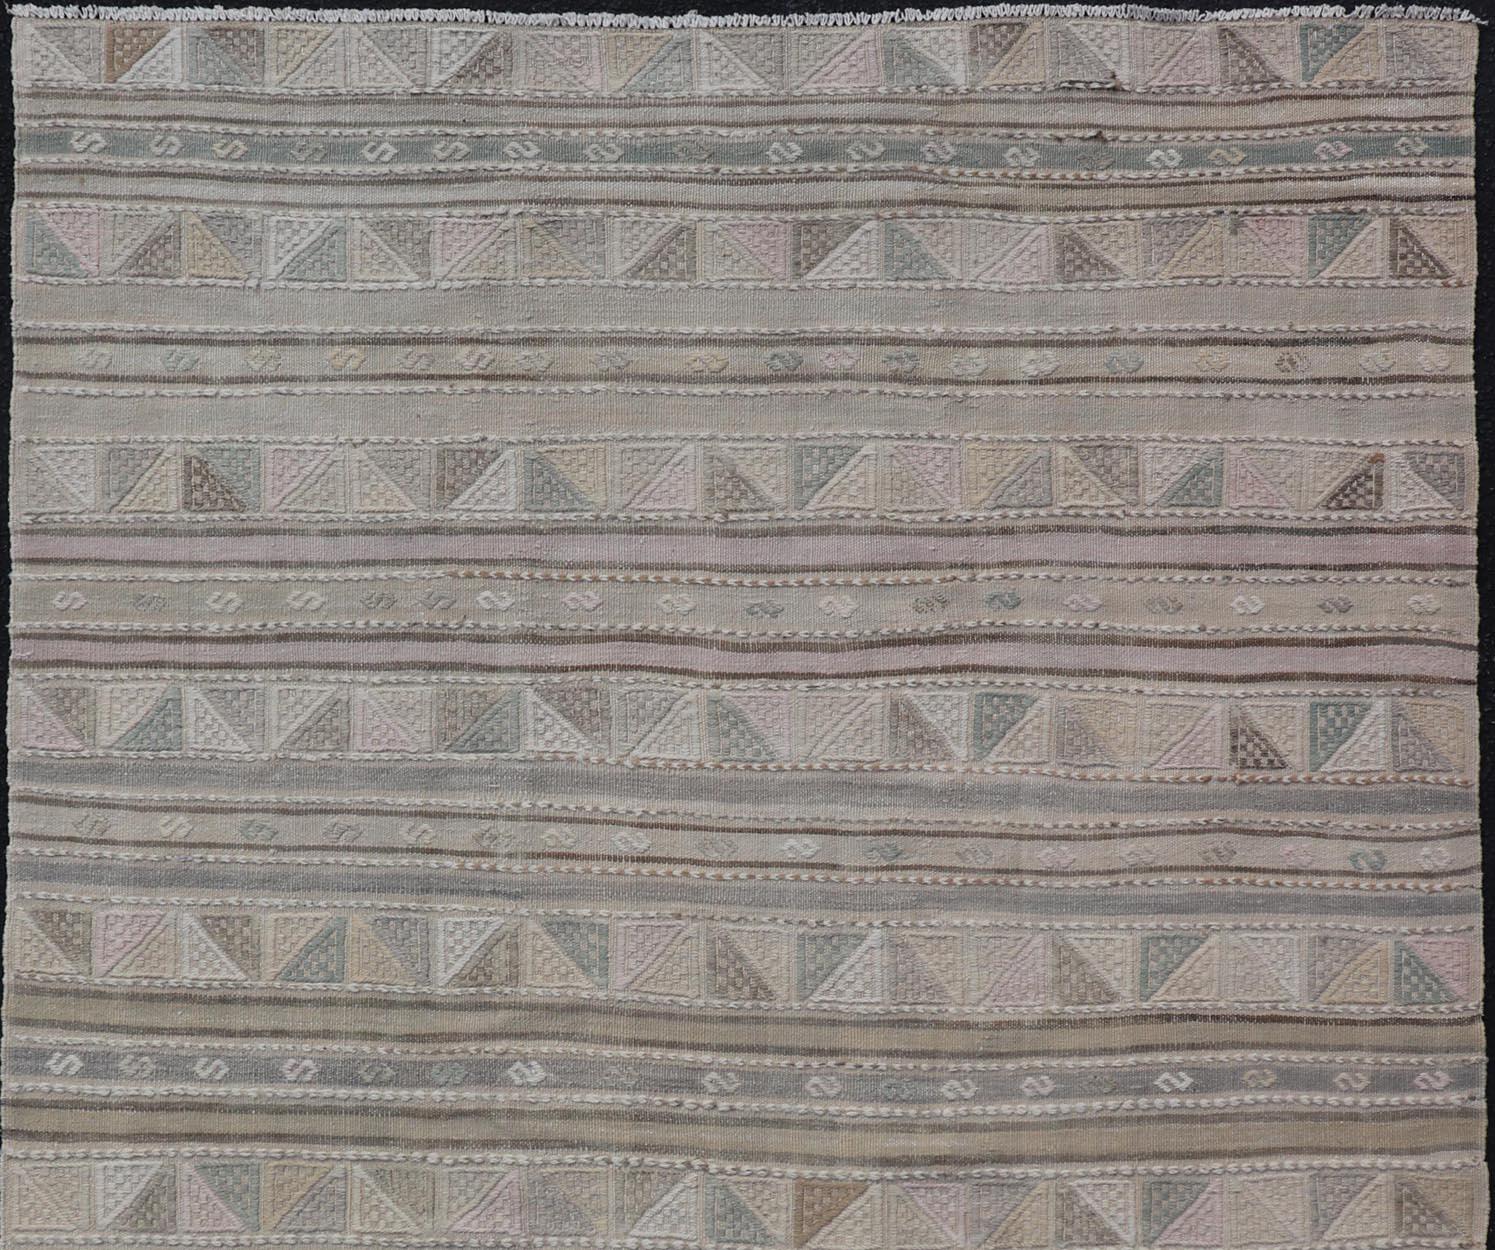 Turkish Flat-Weave with Embroideries Kilim in Taupe, Green, Brown, and Tan For Sale 1